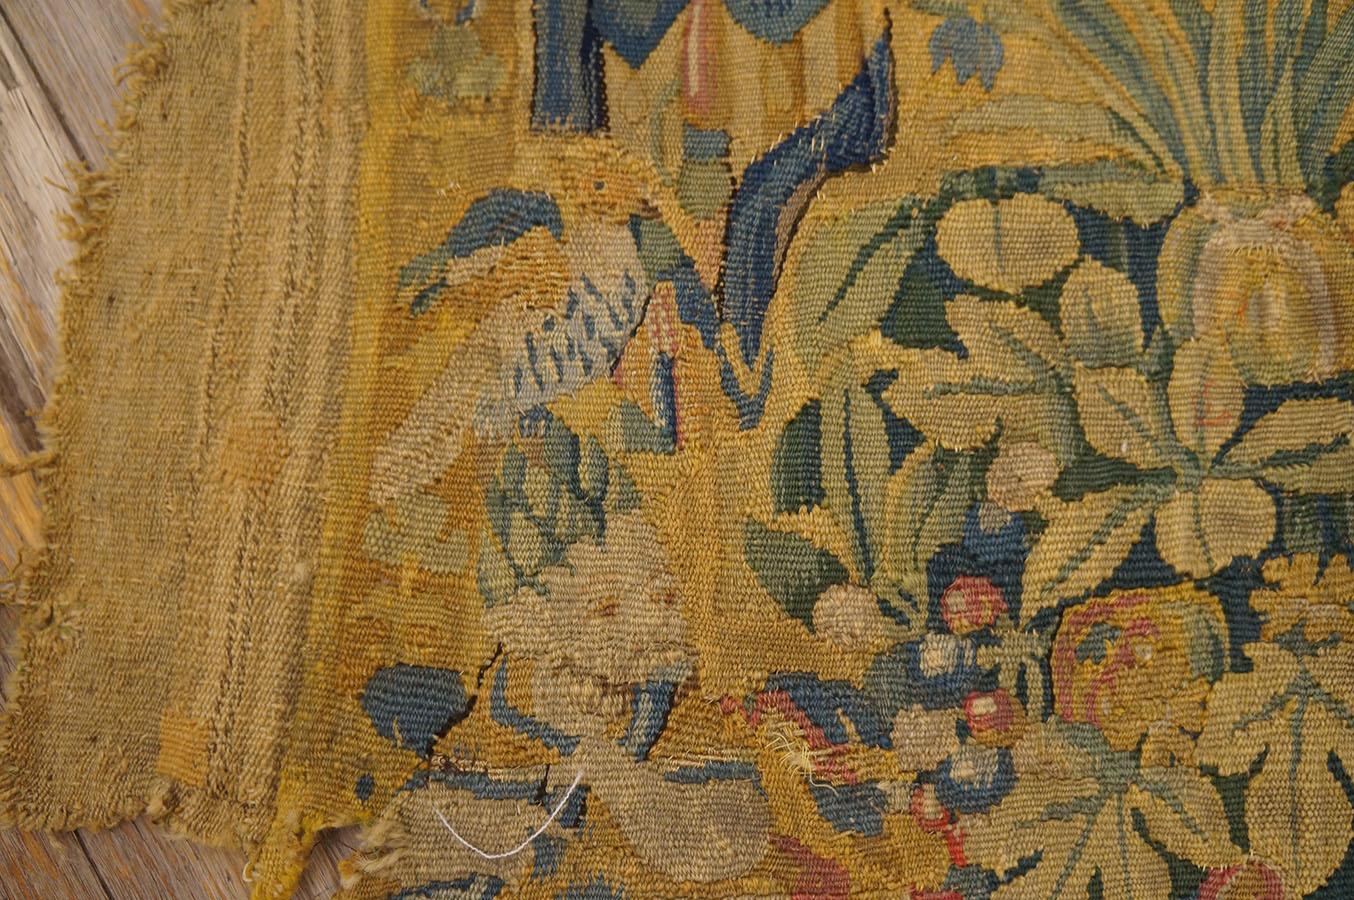 Hand-Woven Mid 17th Century Flemish Tapestry Set2' 6